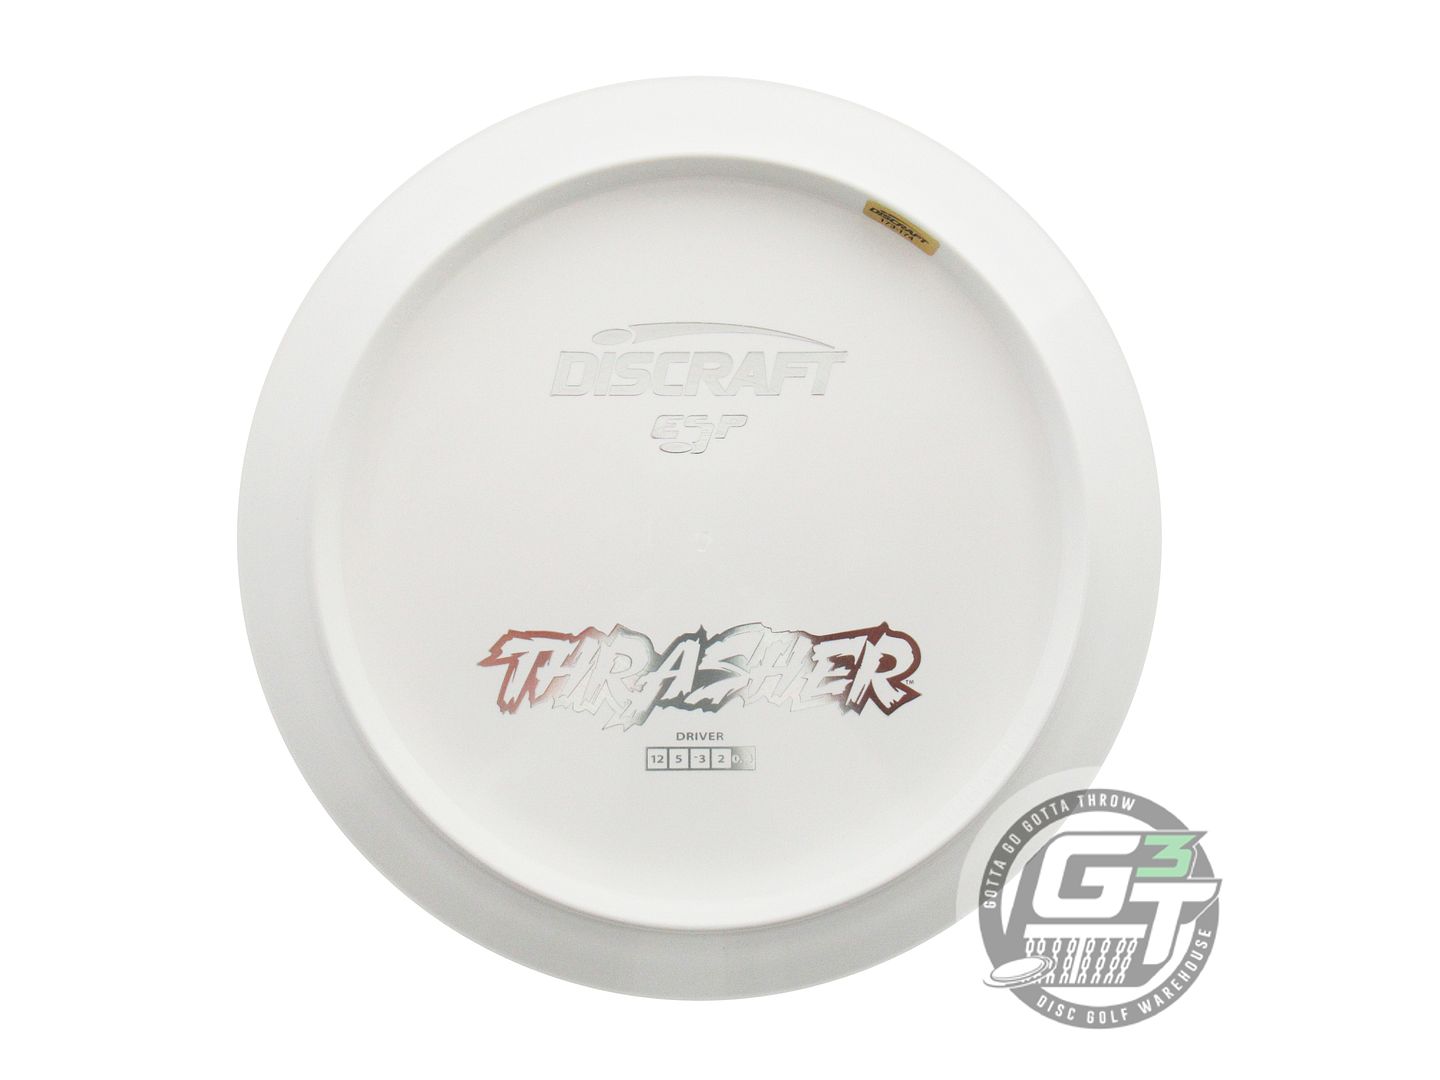 Discraft Dye Pack Bottom Stamp ESP Thrasher Distance Driver Golf Disc (Individually Listed)